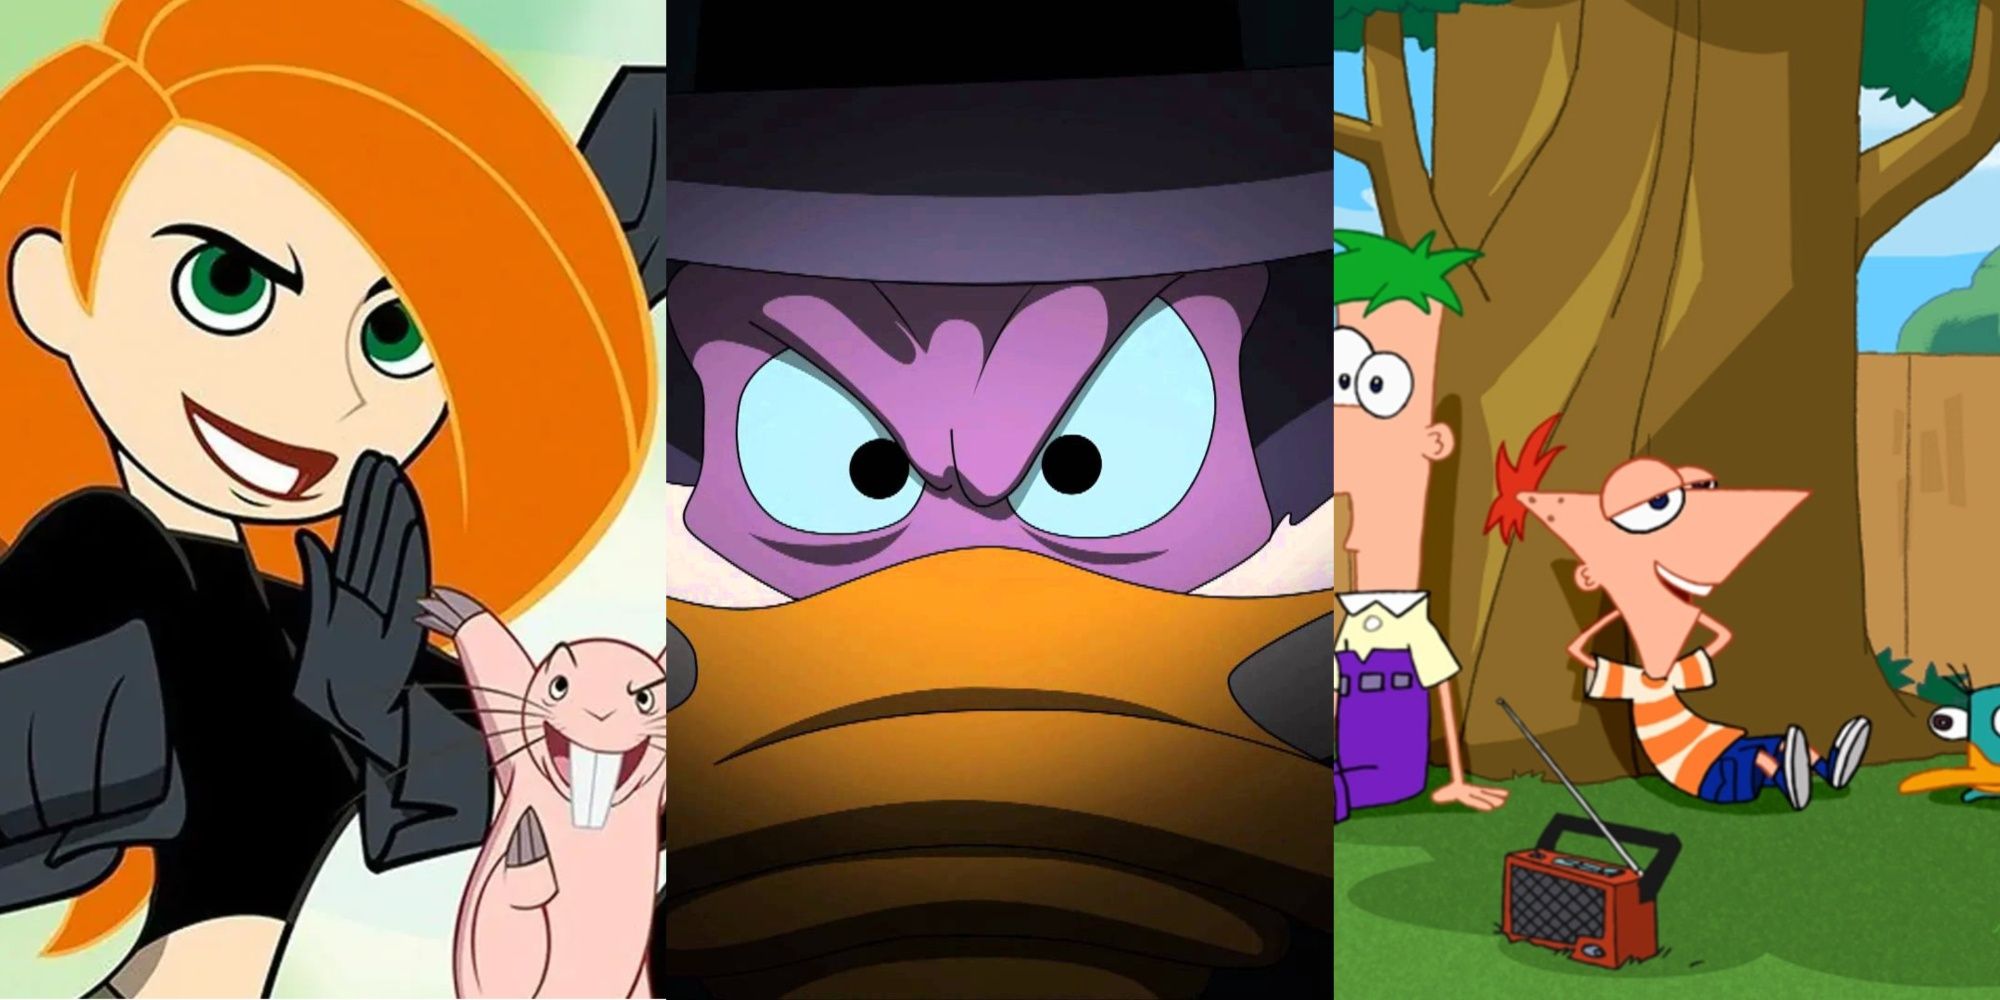 Kim Possible left, Darkwing Duck middle, Phineas and Ferb right